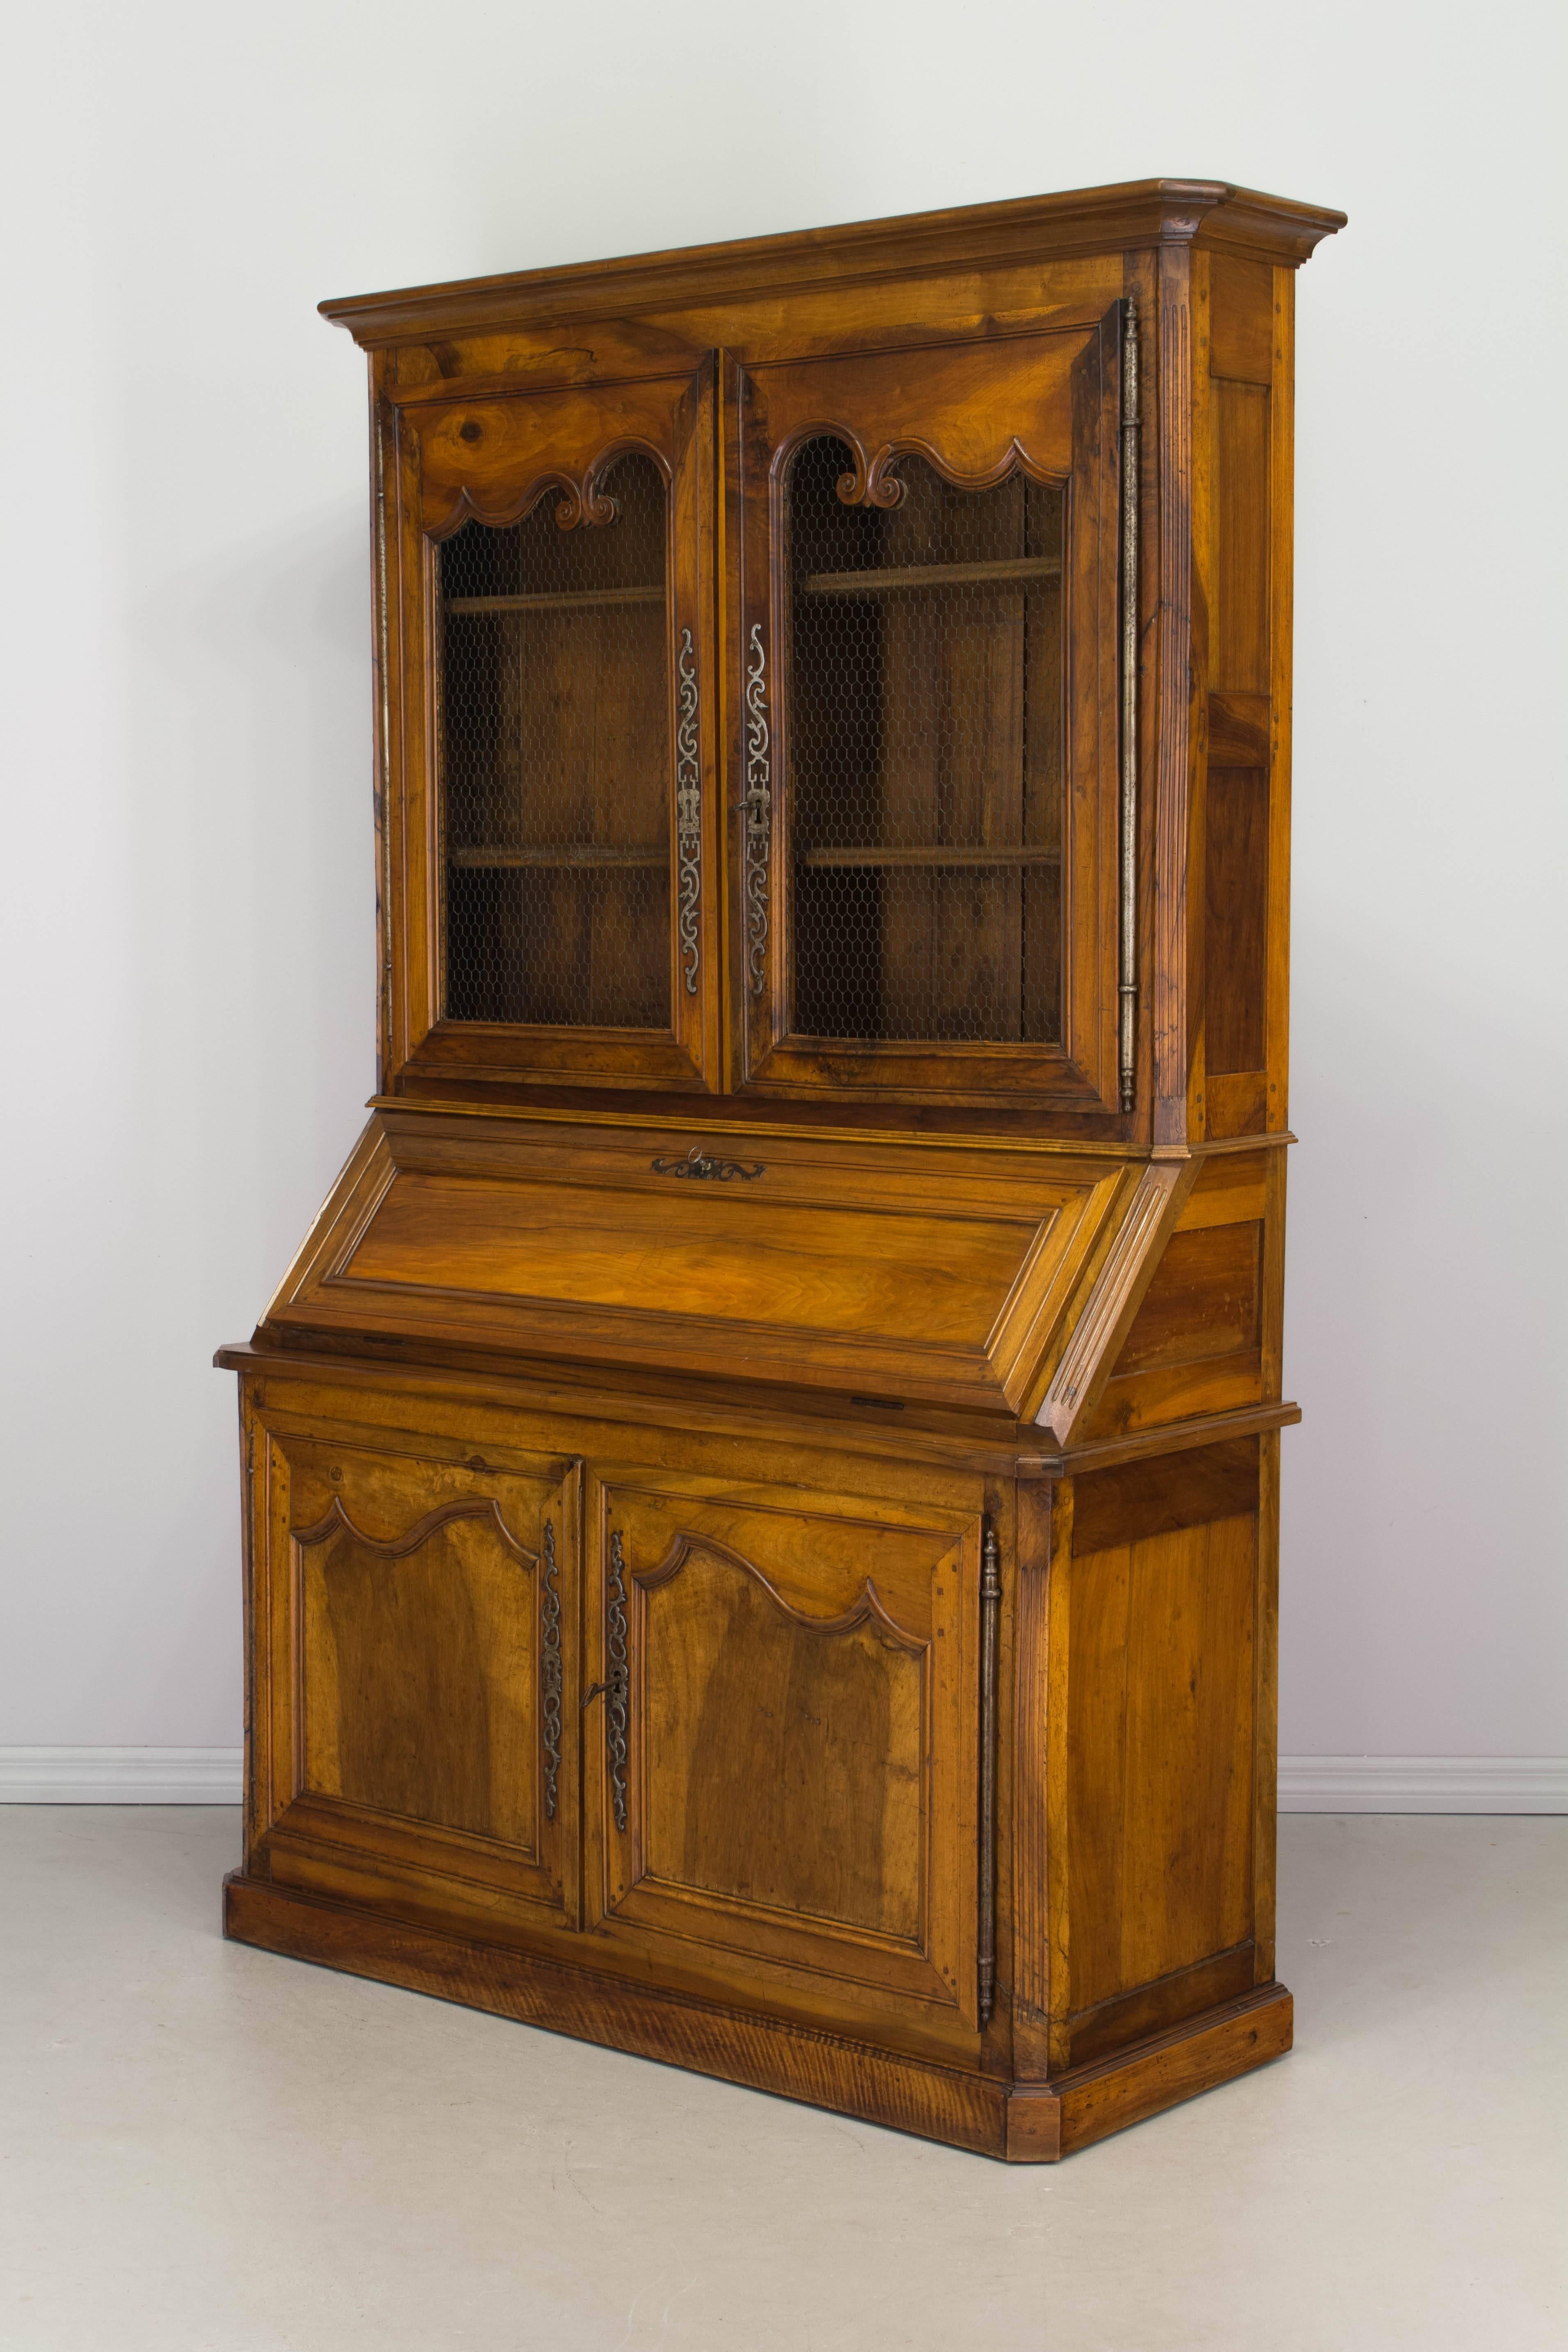 An exceptional 19th century Louis XV style scriban from the Loire Valley, made of solid walnut with pegged construction and mortise and tenon joints. The abbattant or slant front desk, hinges open to reveal a leather writing surface, a small shelf